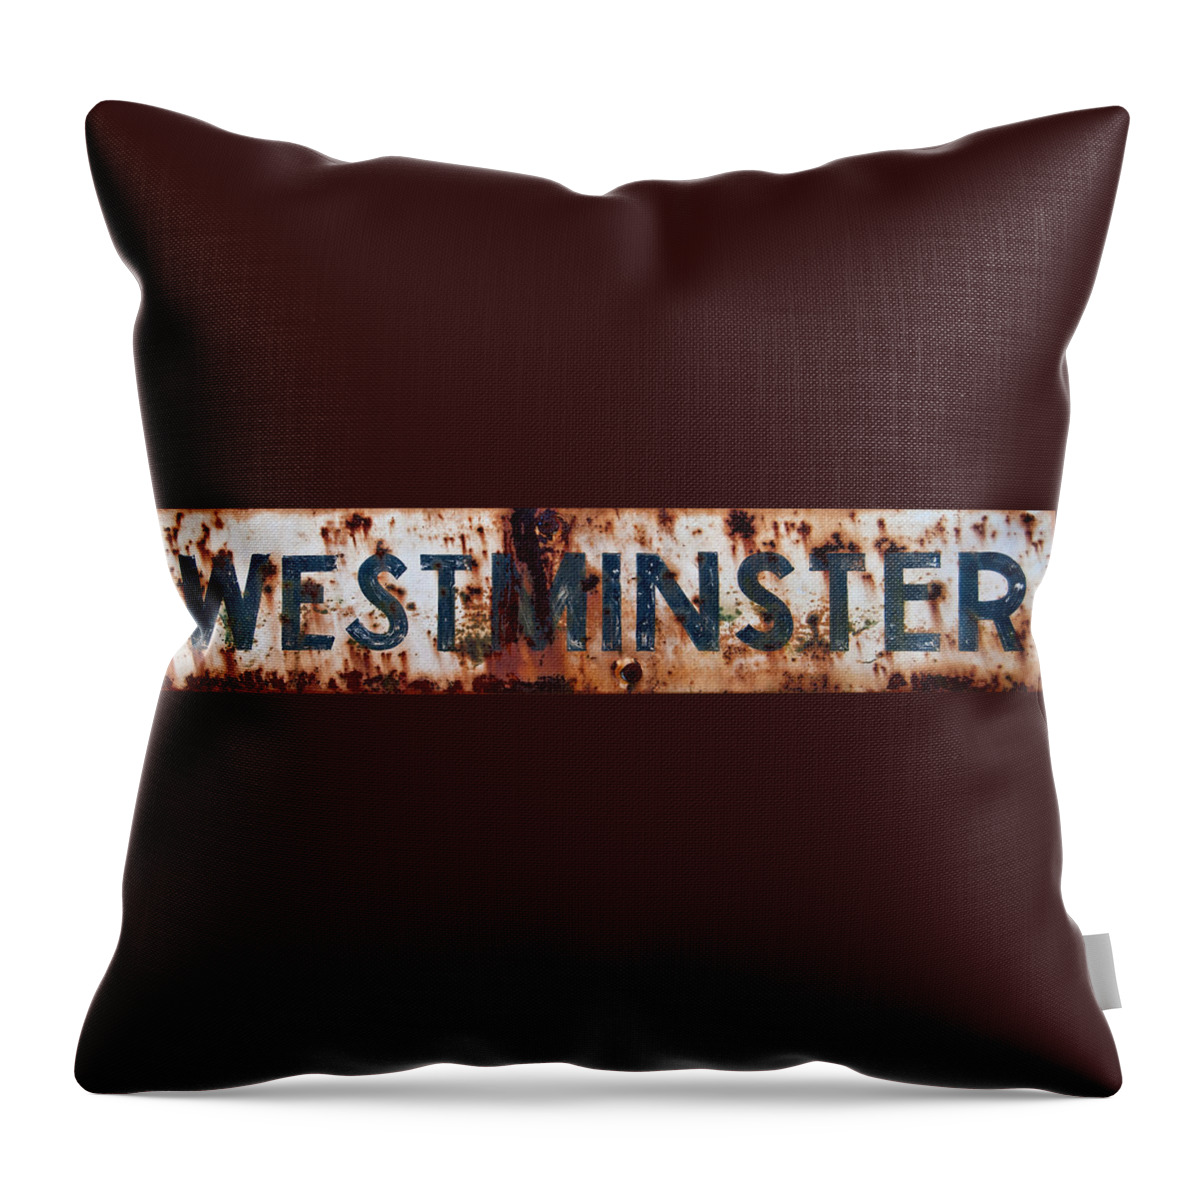 Westminster Throw Pillow featuring the photograph Westminster by Jani Freimann